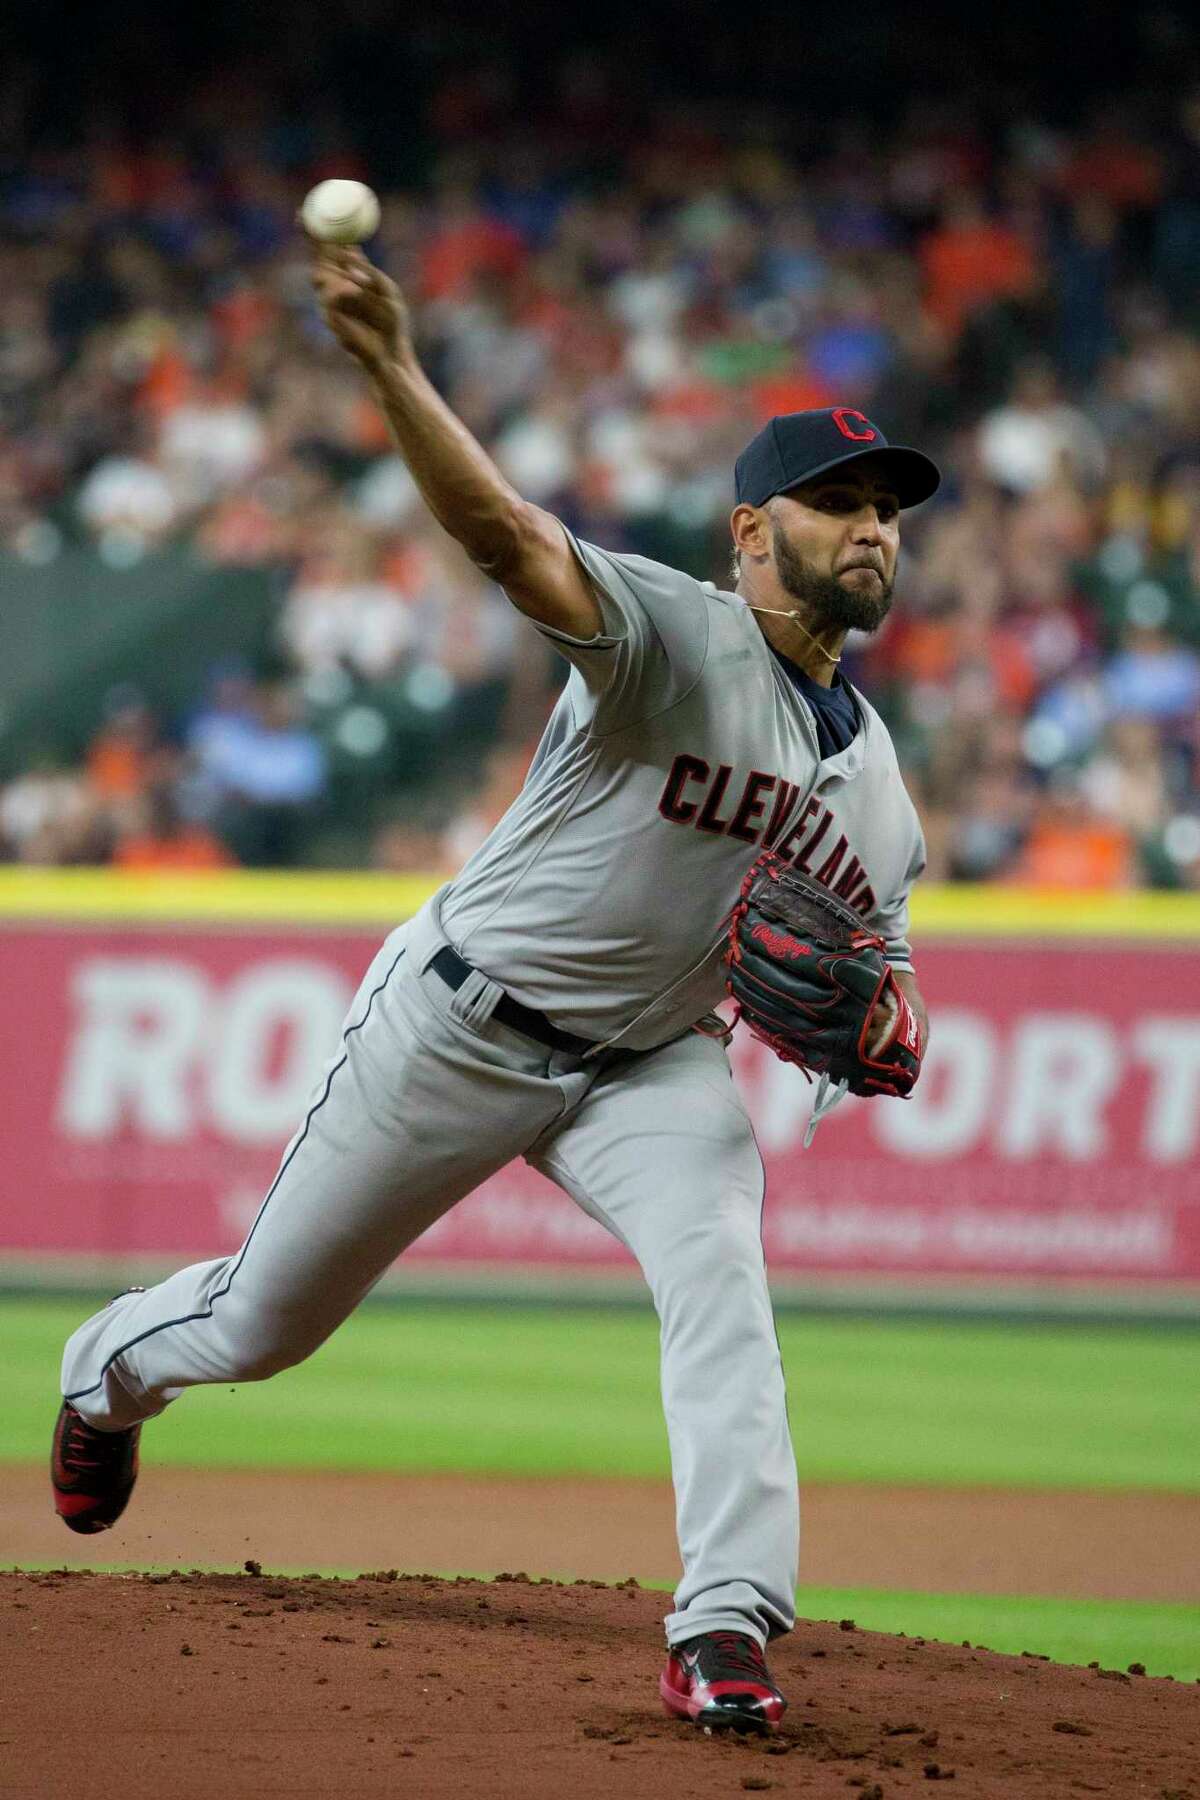 Cleveland Indians pitcher Danny Salazar delivers against the Houston Astros in the first inning of a baseball game Sunday, May 21, 2017, in Houston. (AP Photo/Richard Carson)